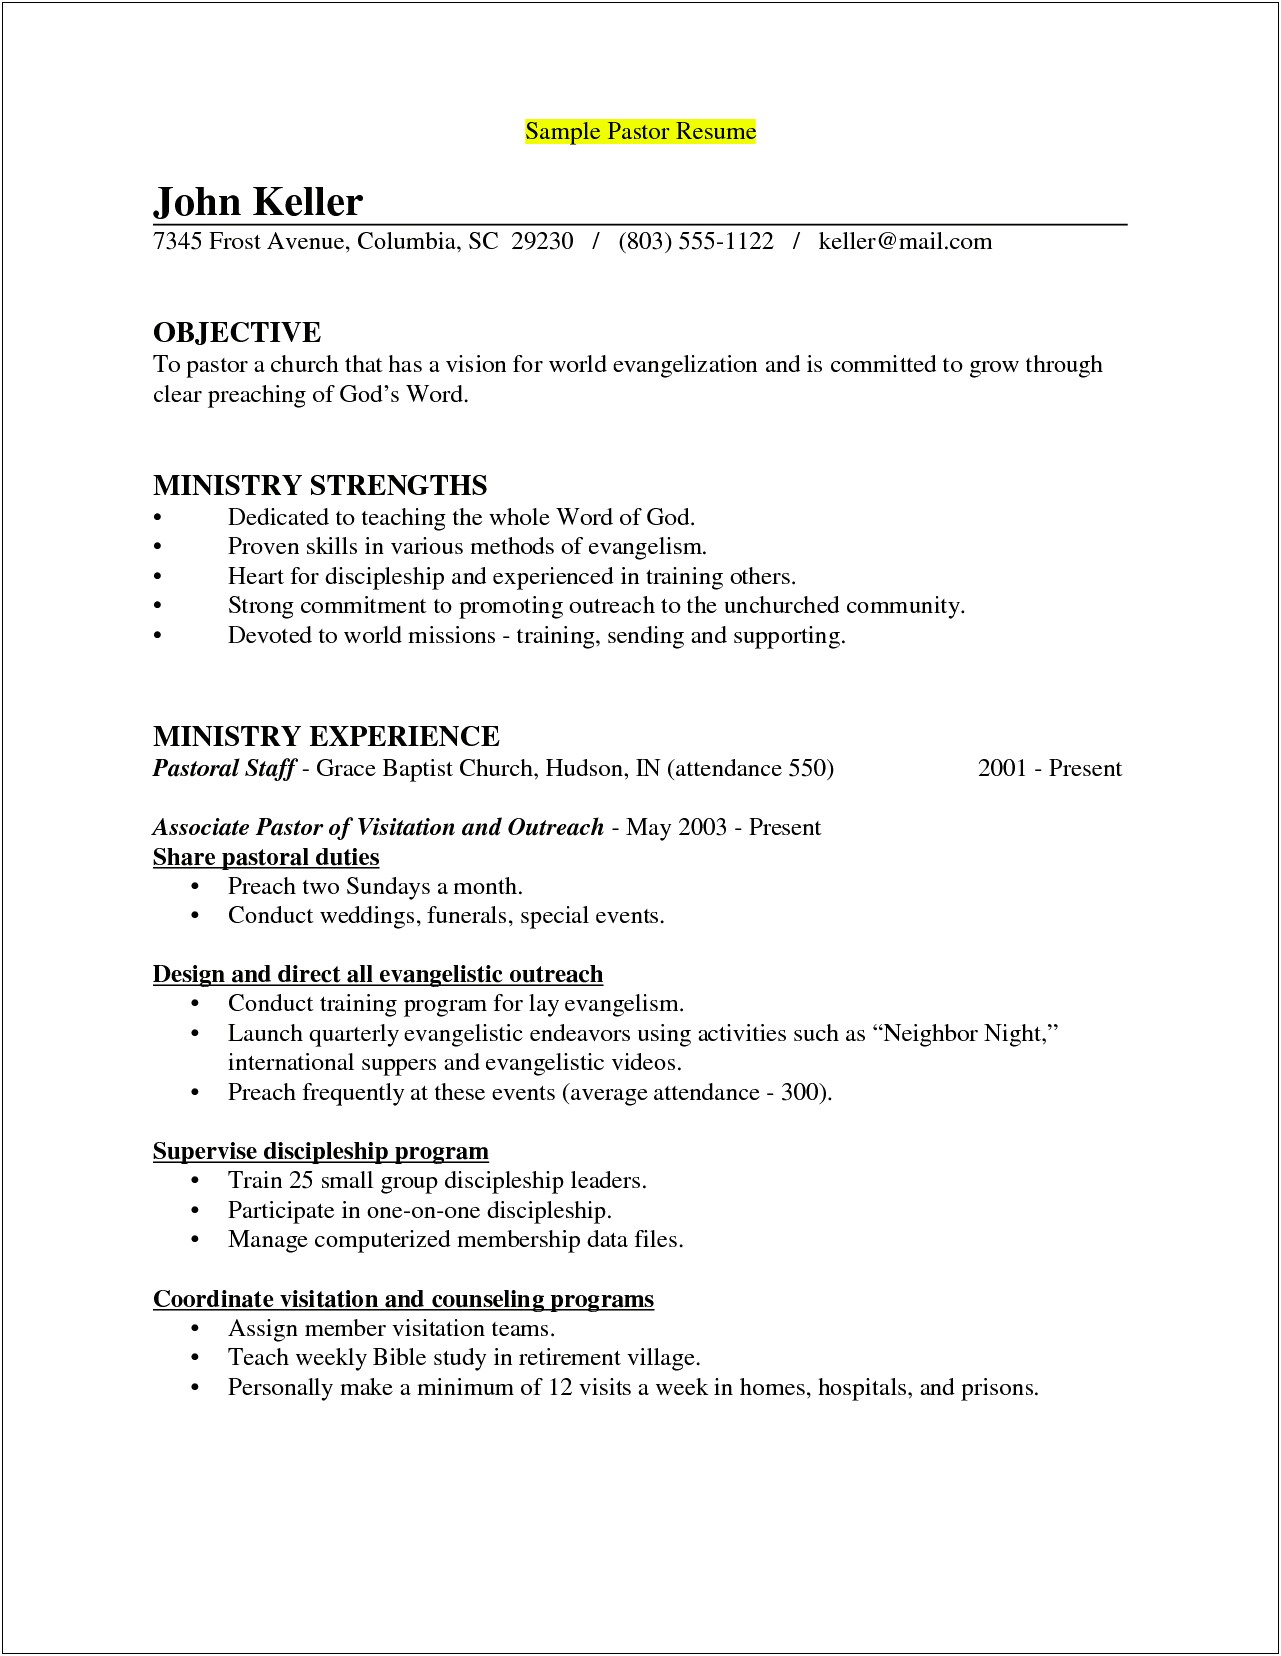 Free Resume Templates For Pastor